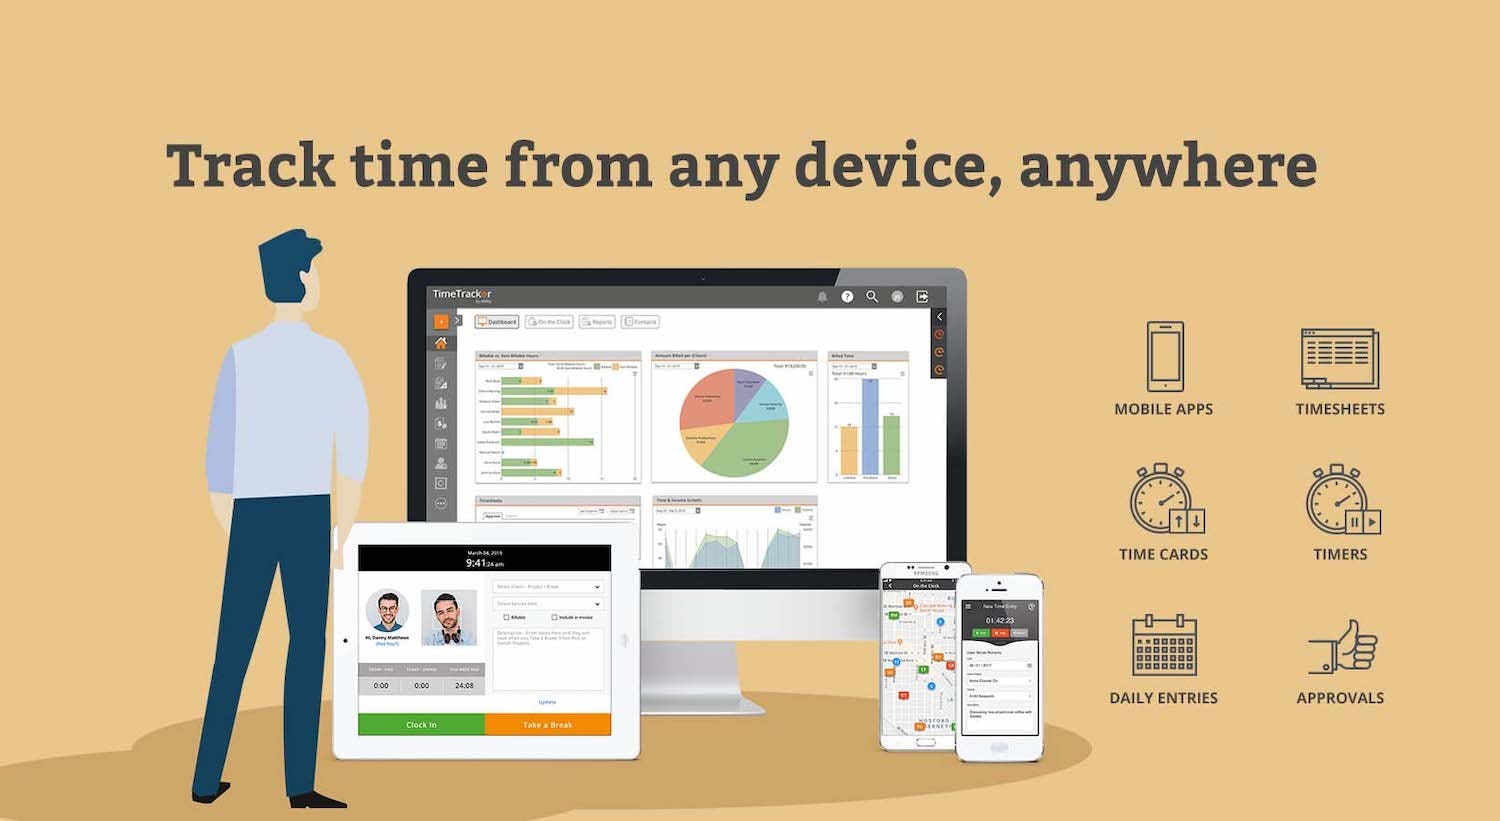 Time Tracker Software - Time tracking from any device, anywhere - even offline!